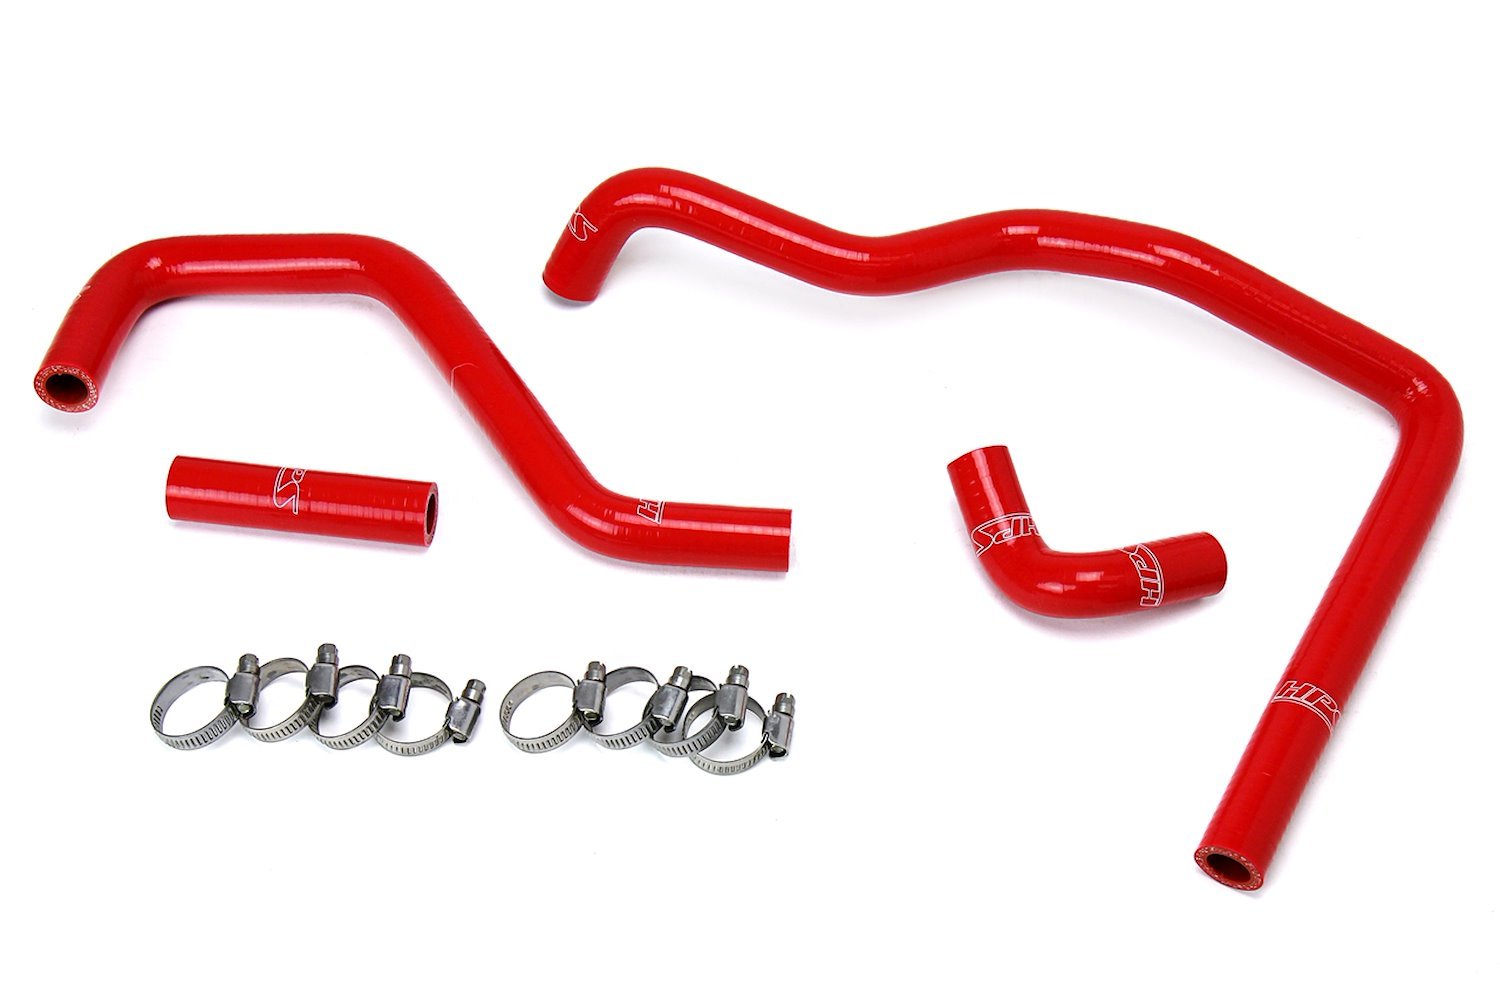 57-1587-RED Heater Hose Kit, High-Temp 3-Ply Reinforced Silicone, Replace OEM Rubber Heater Coolant Hoses